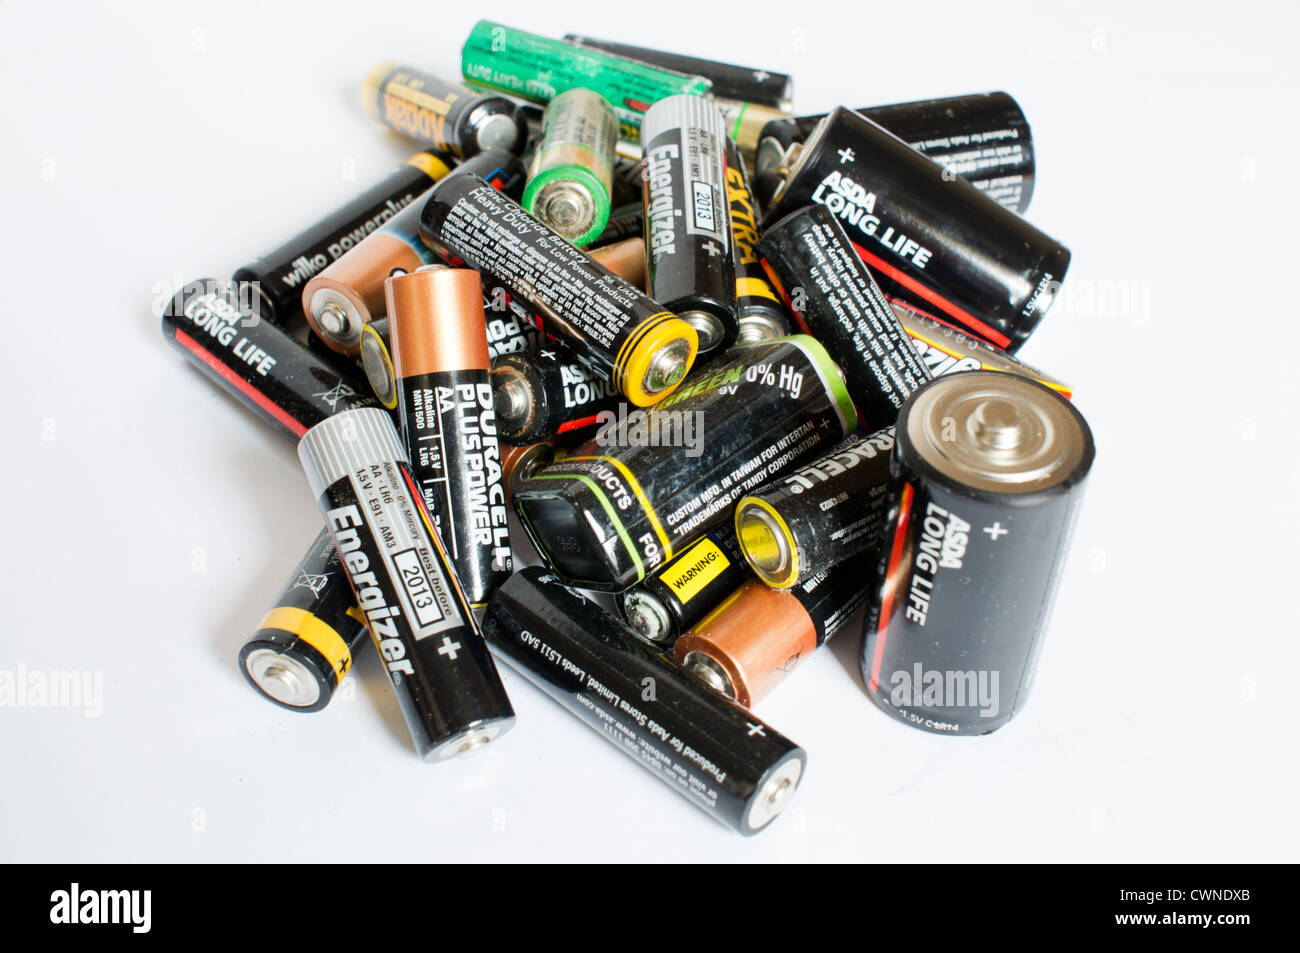 A pile of dead batteries on a white background Stock Photo